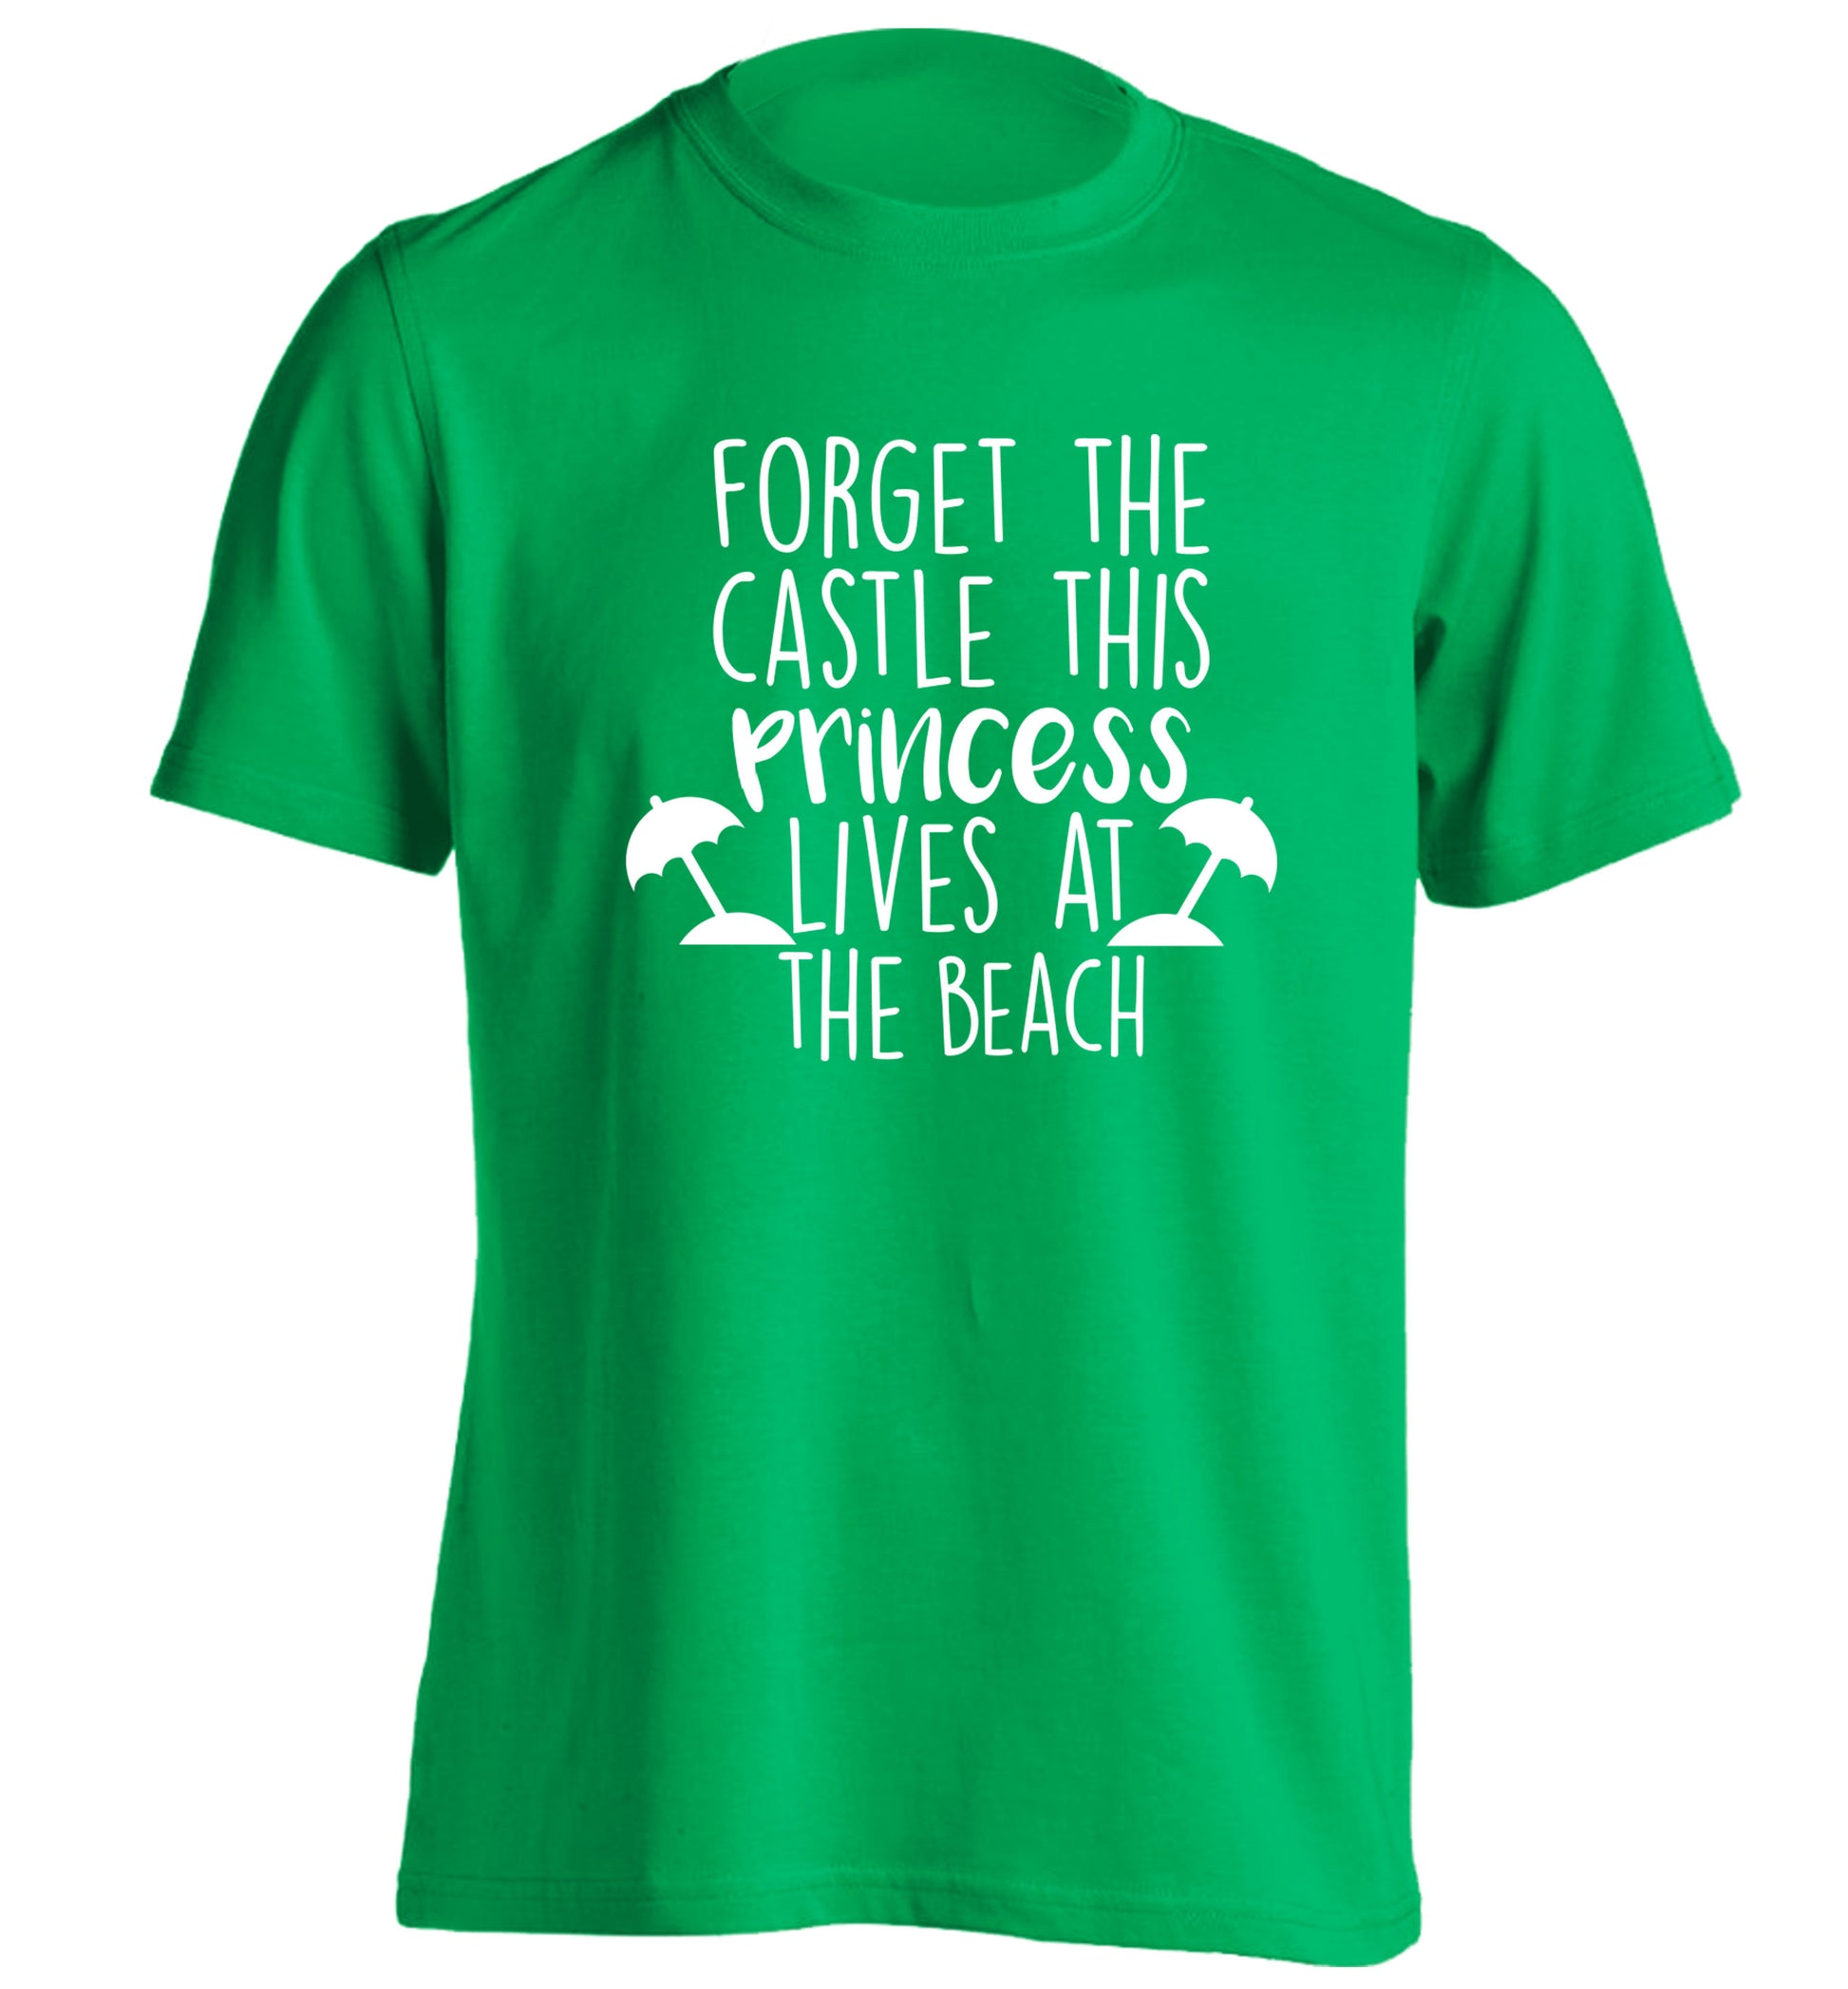 Forget the castle this princess lives at the beach adults unisex green Tshirt 2XL